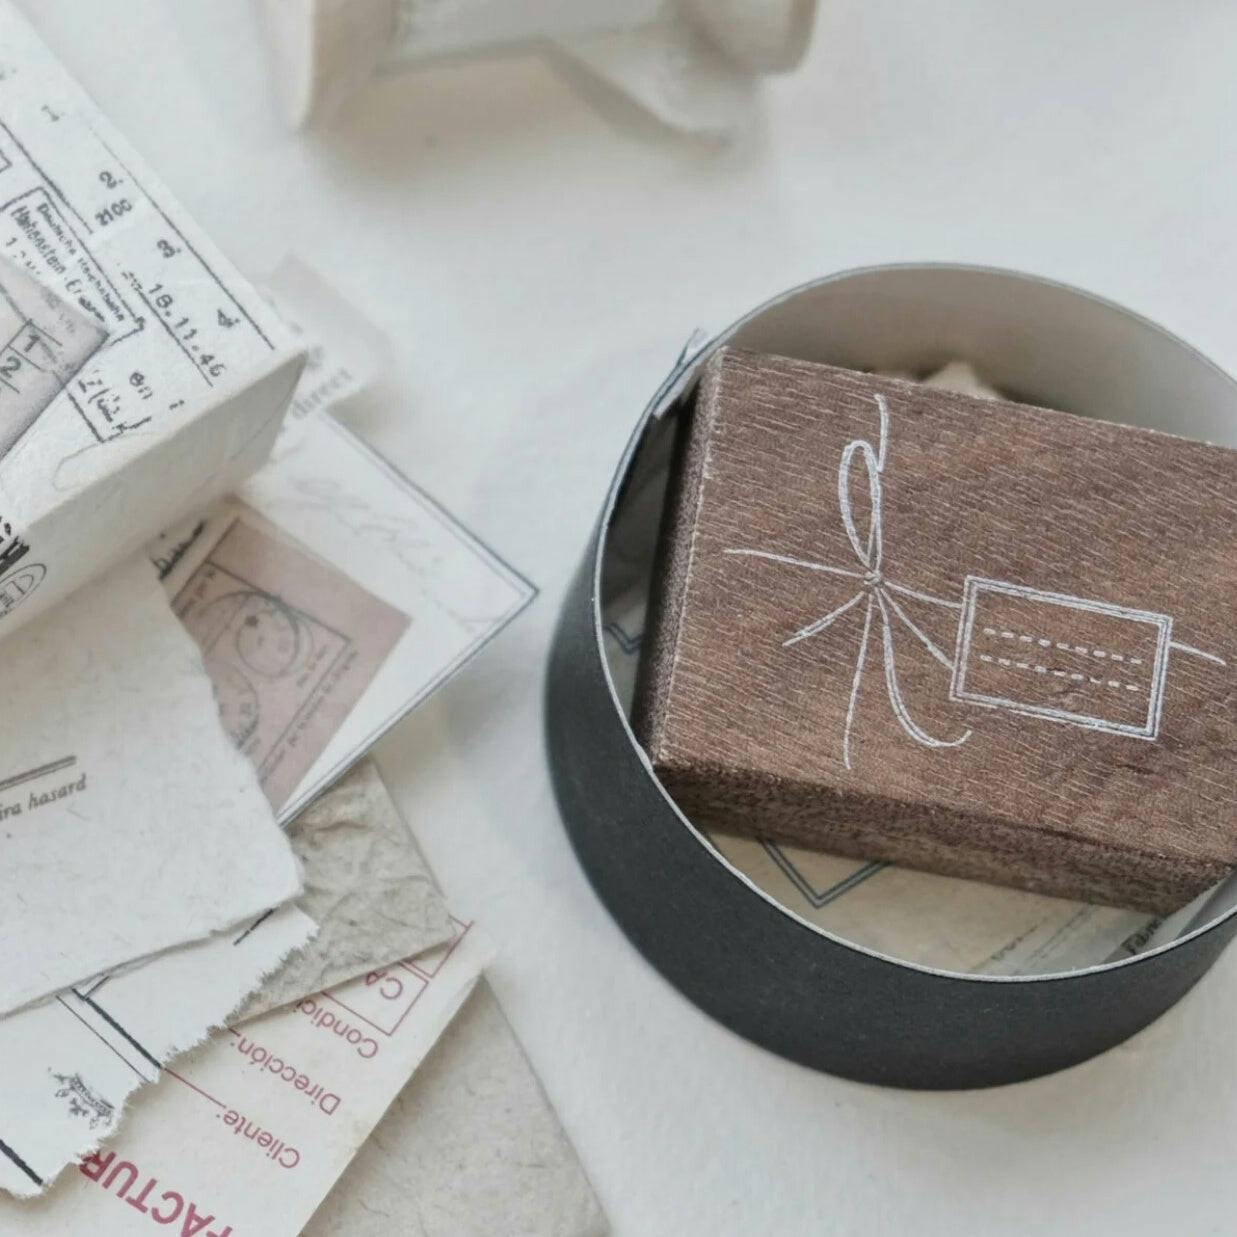 Jieyanow Atelier Rubber Stamp Not Your Usual Tags 04